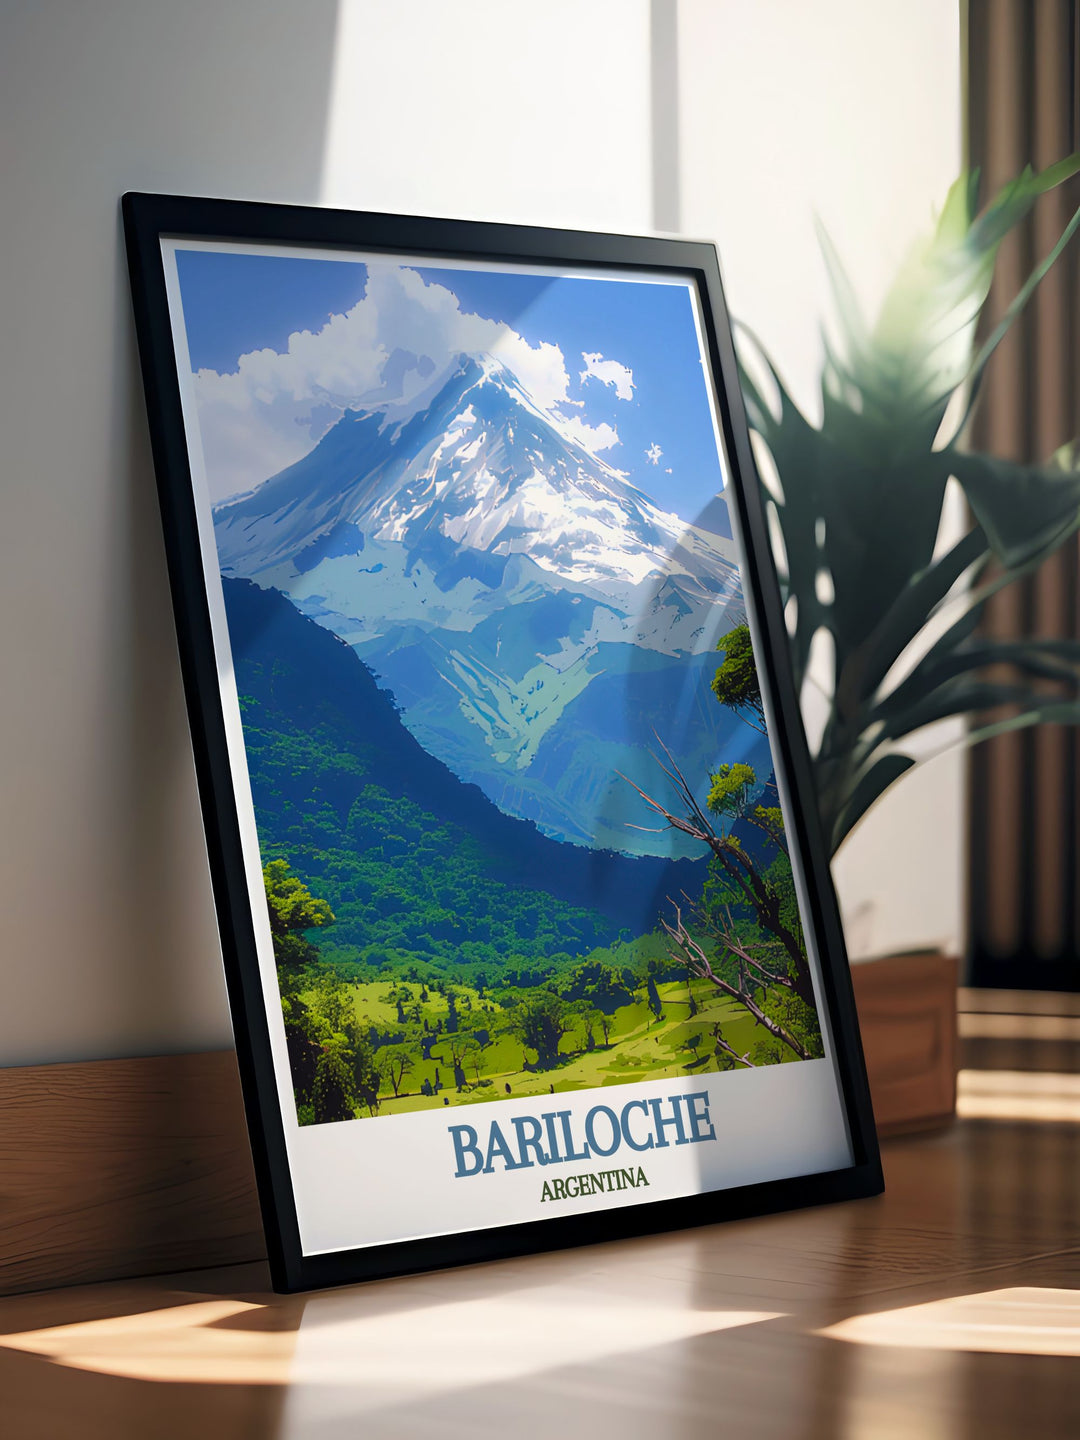 Exquisite Argentina print highlighting the stunning landscapes of San Carlos de Bariloche and the majestic Tronador Volcano, perfect for nature enthusiasts and travel art lovers. Adds a scenic and serene touch to your home decor.